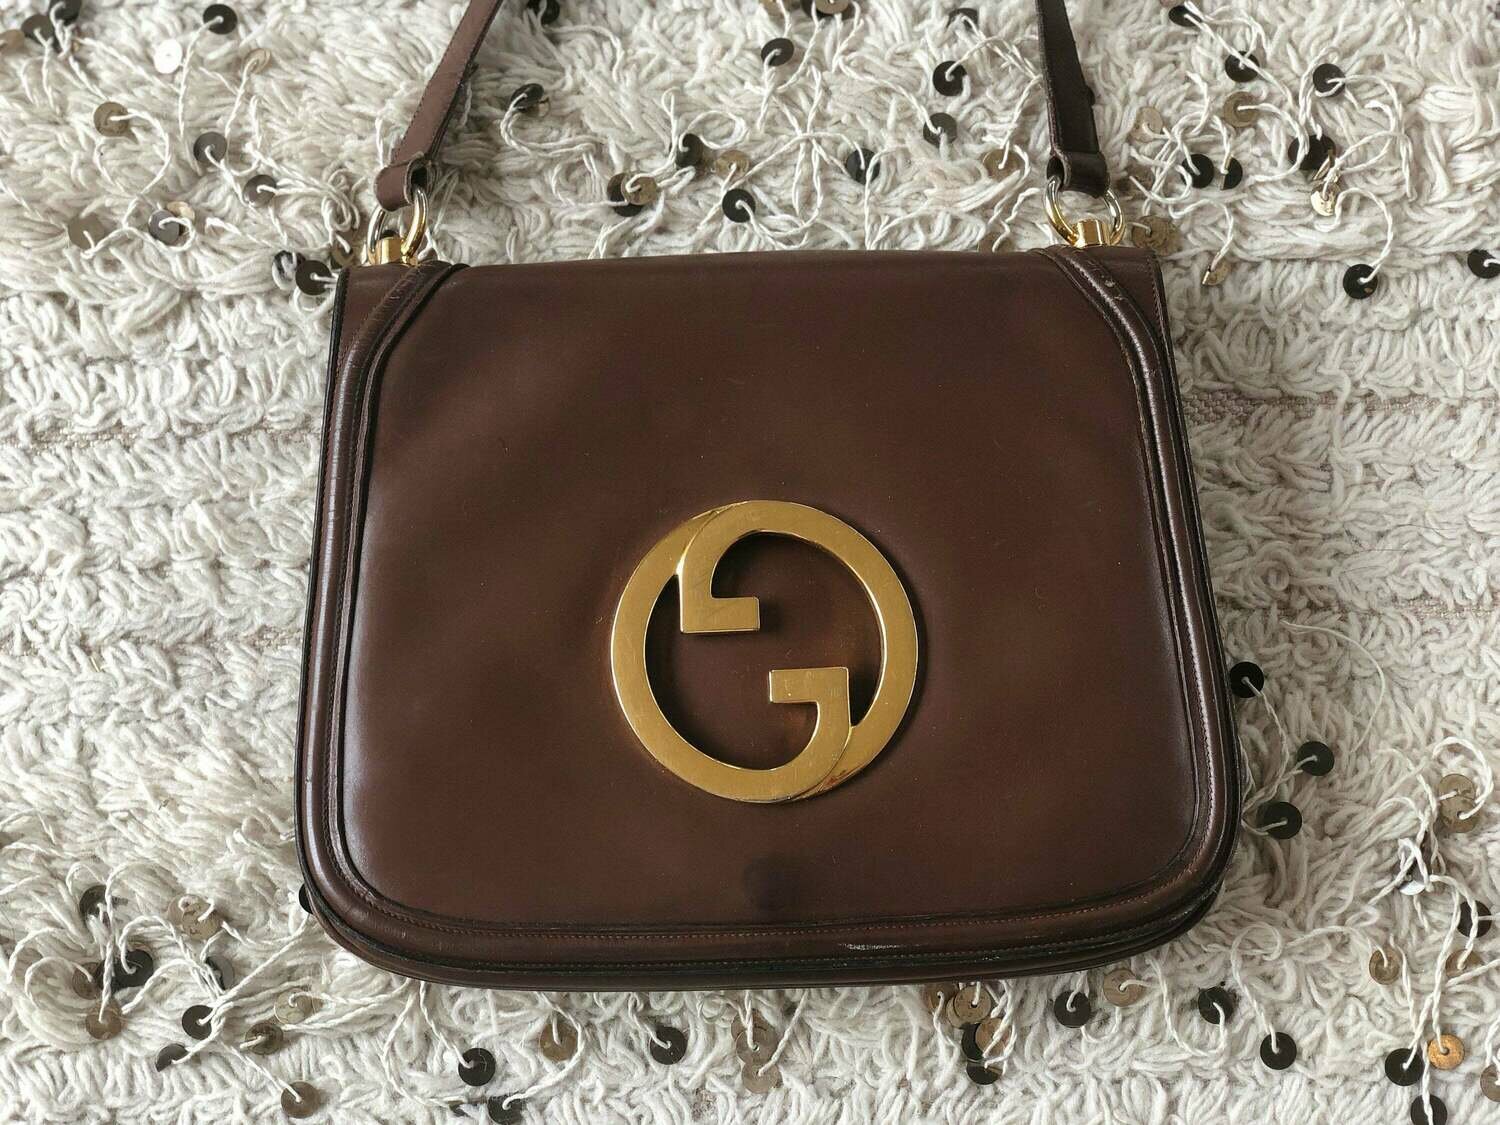 Gucci Blondie small tote bag in brown leather